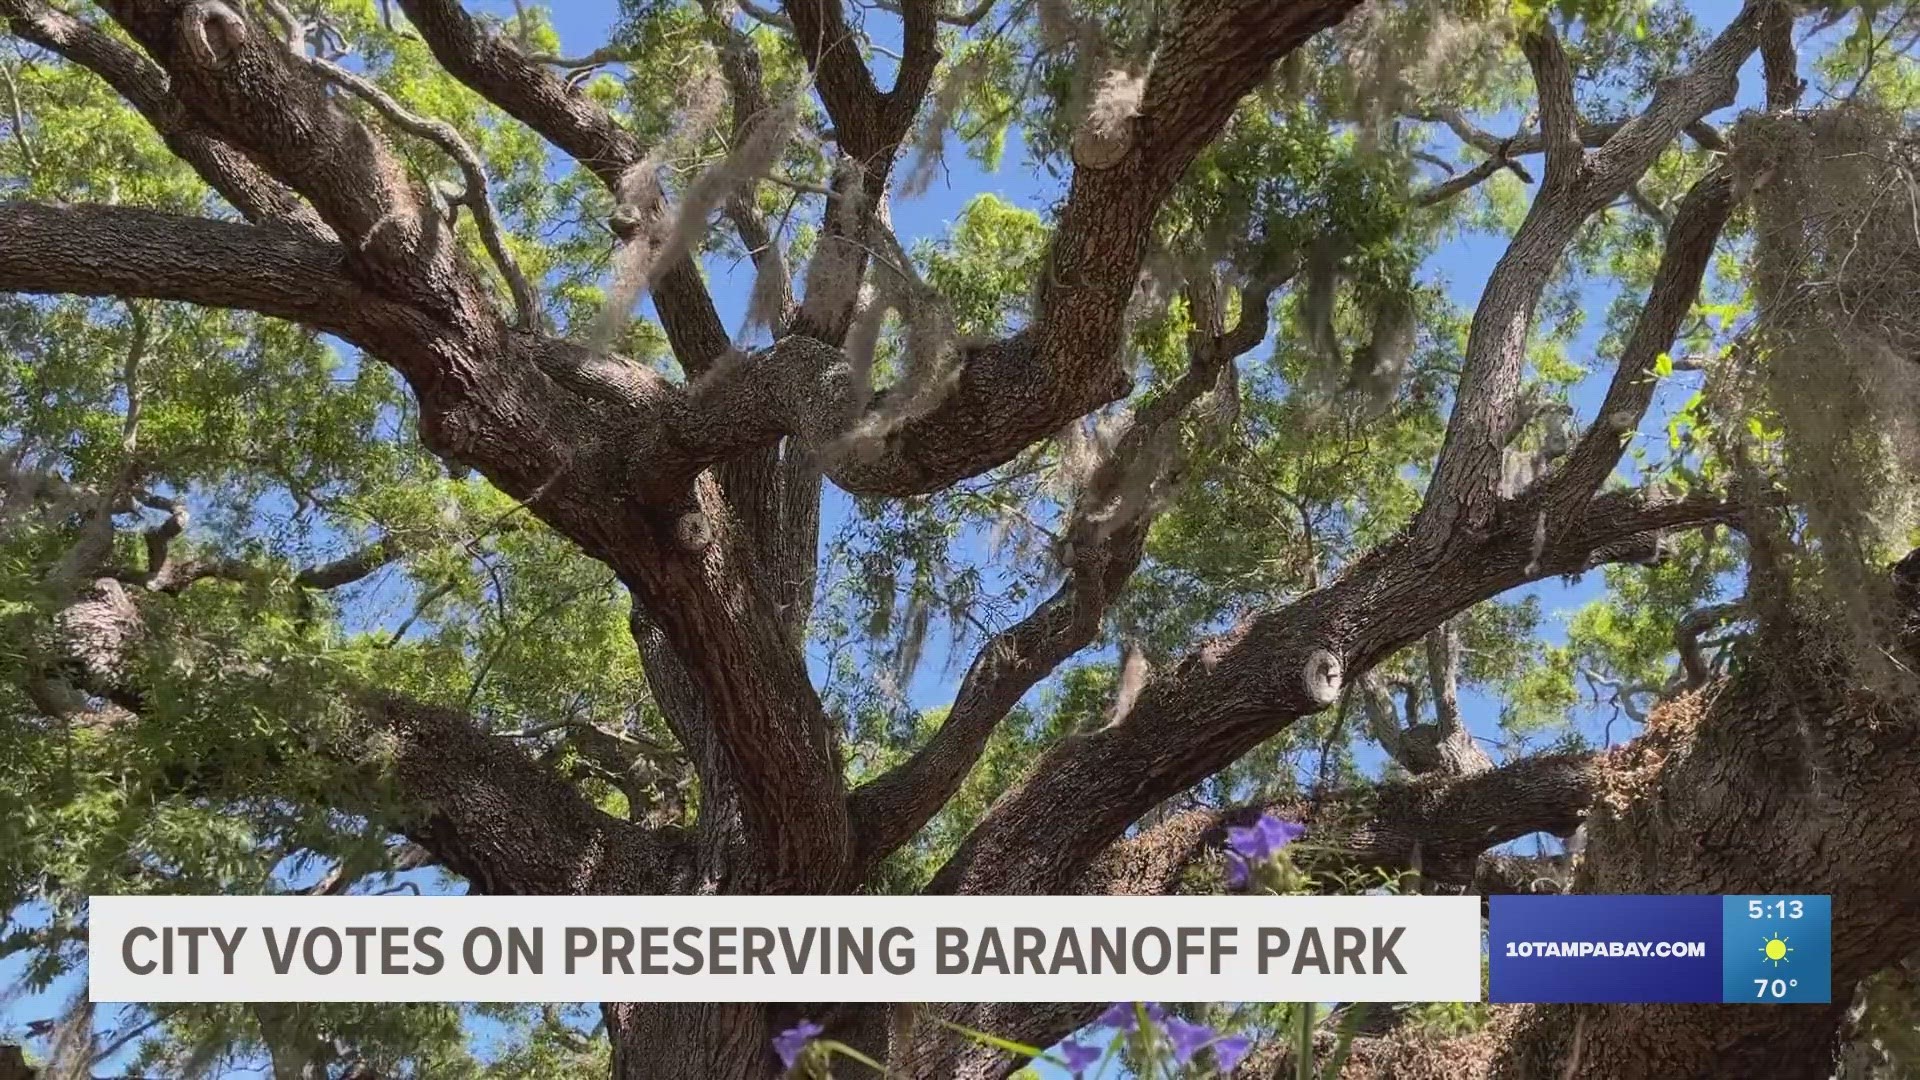 The Baranoff oak tree has been standing for more than 300 years.